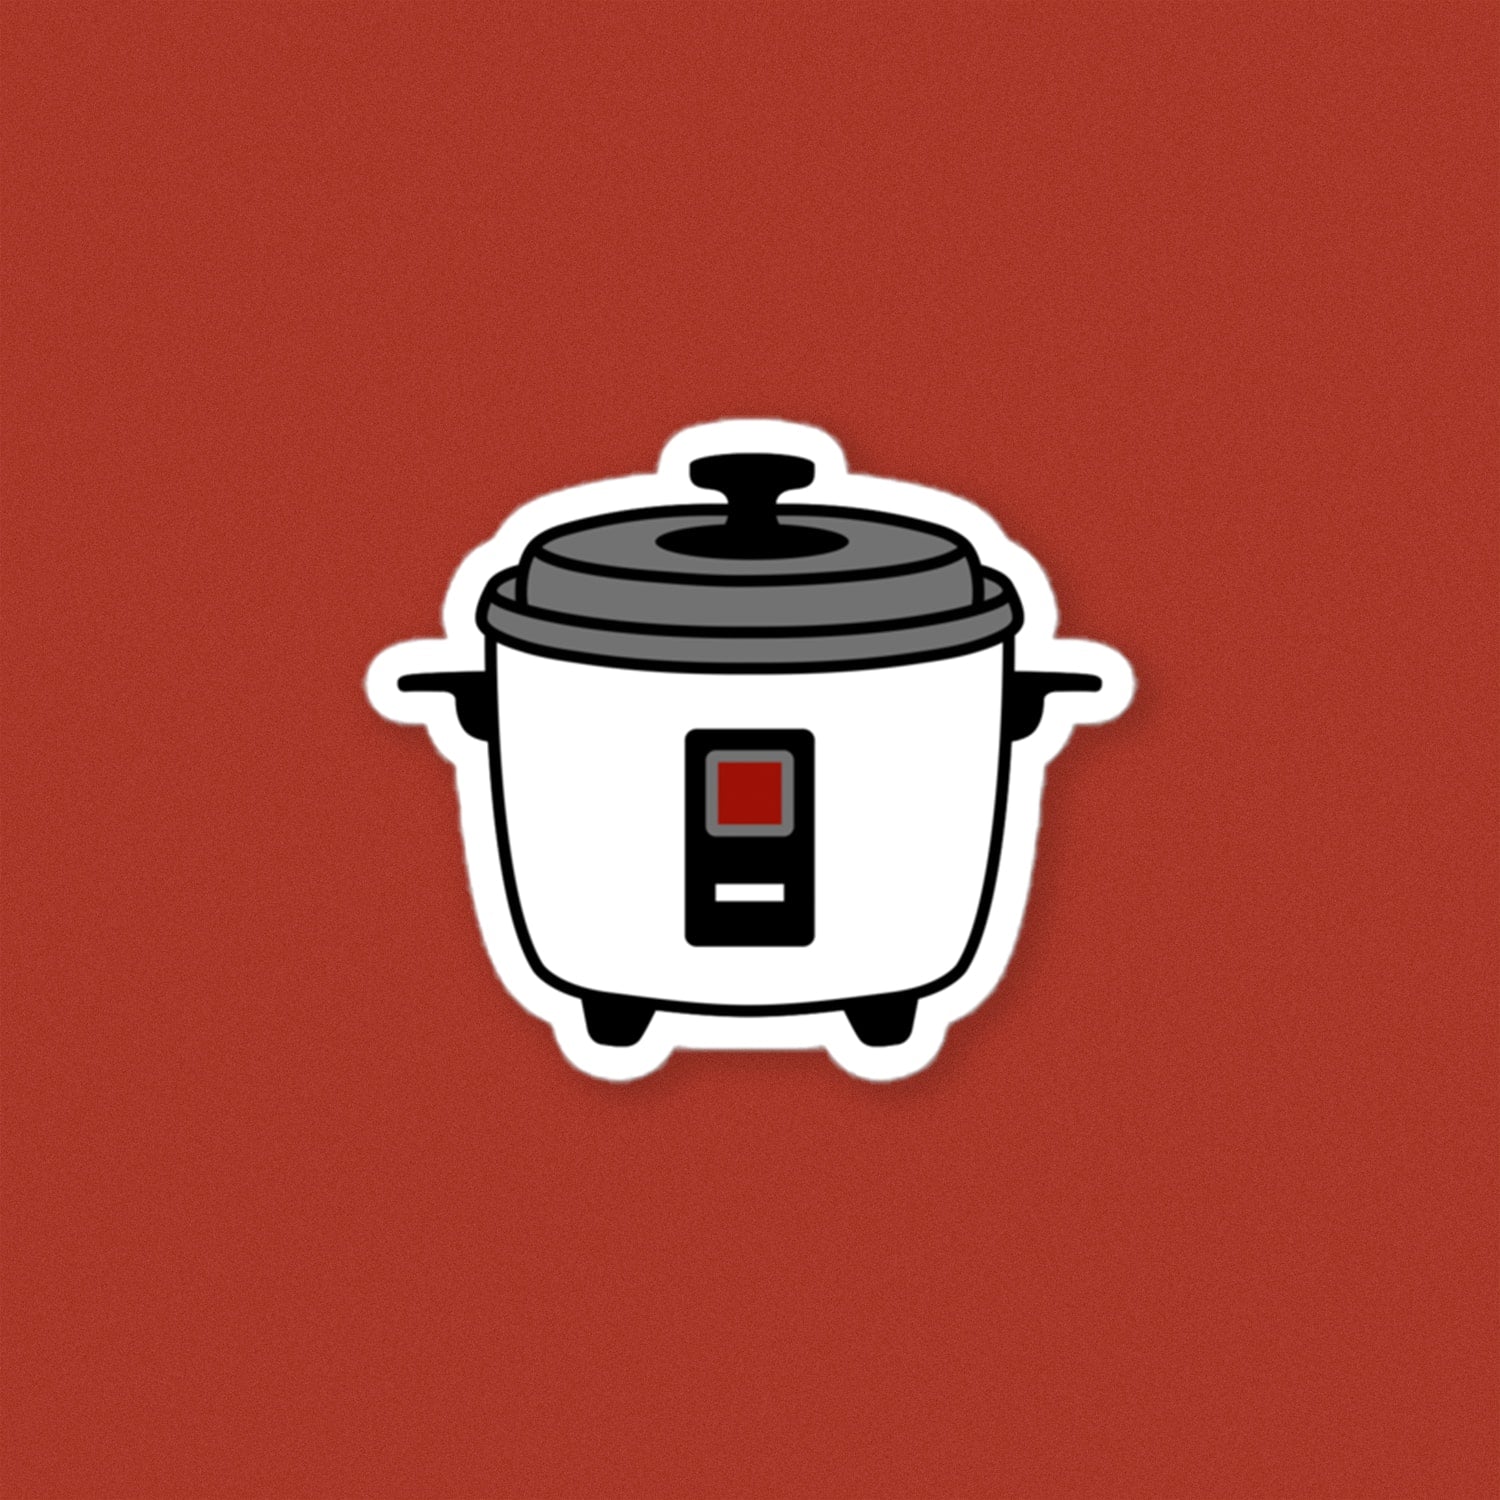 What's Cooking, Retro Rice Cooker Cute Vinyl Sticker 